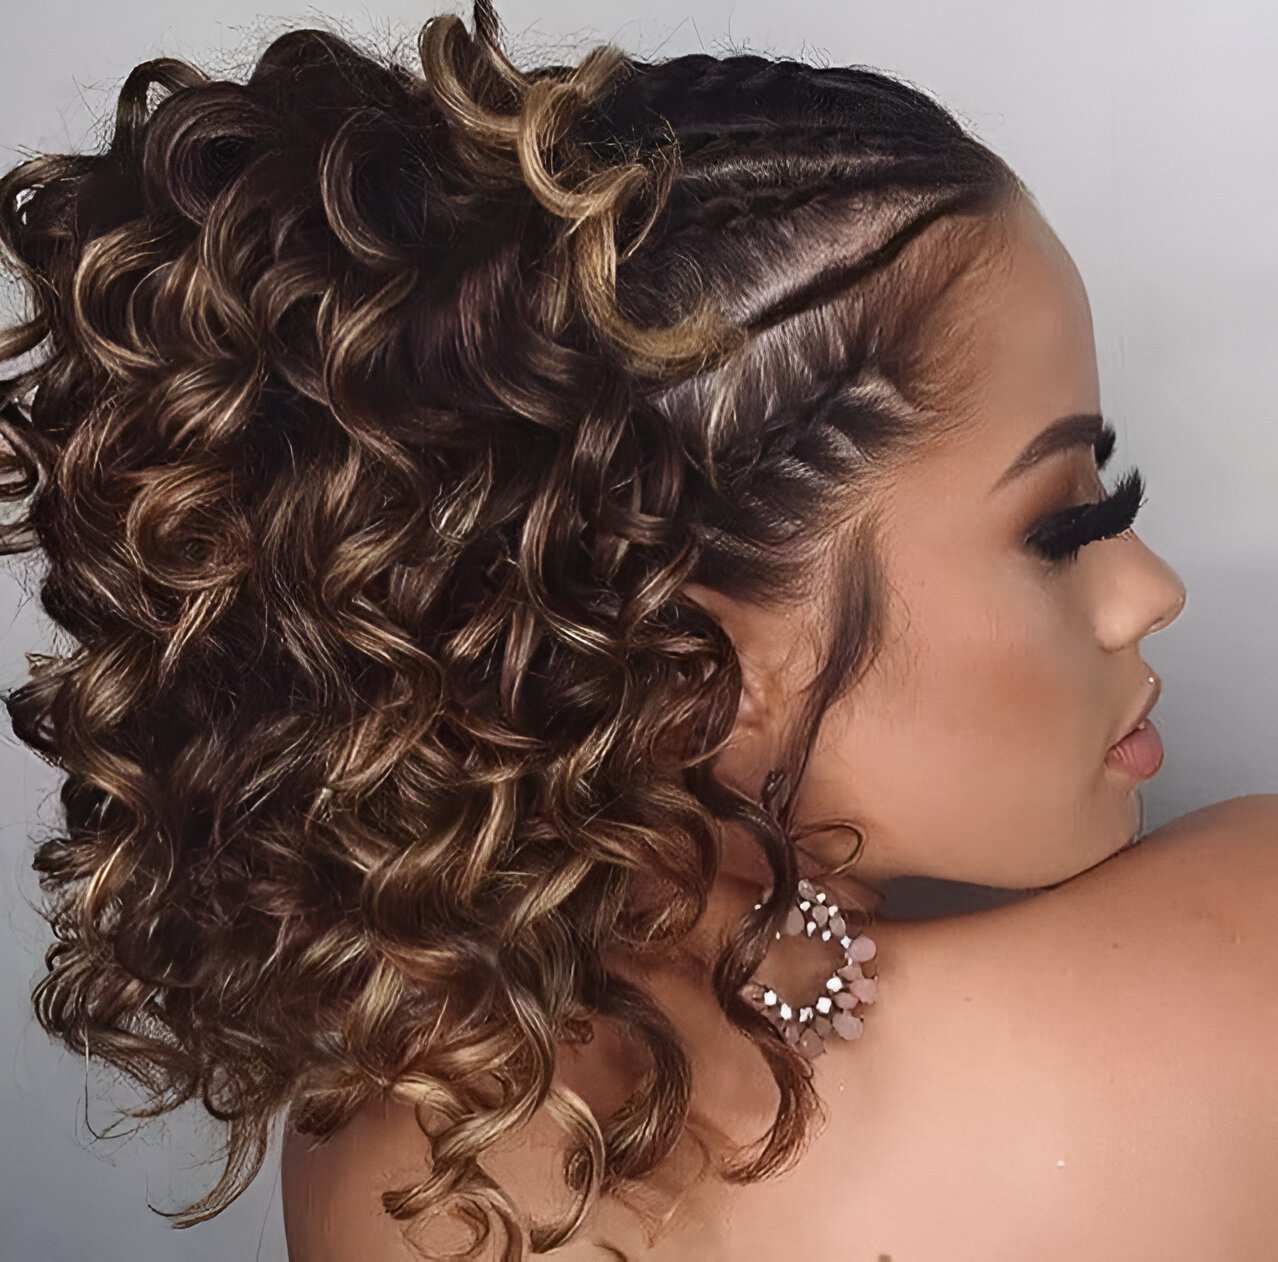 Braided Hairstyles For Curly Hair